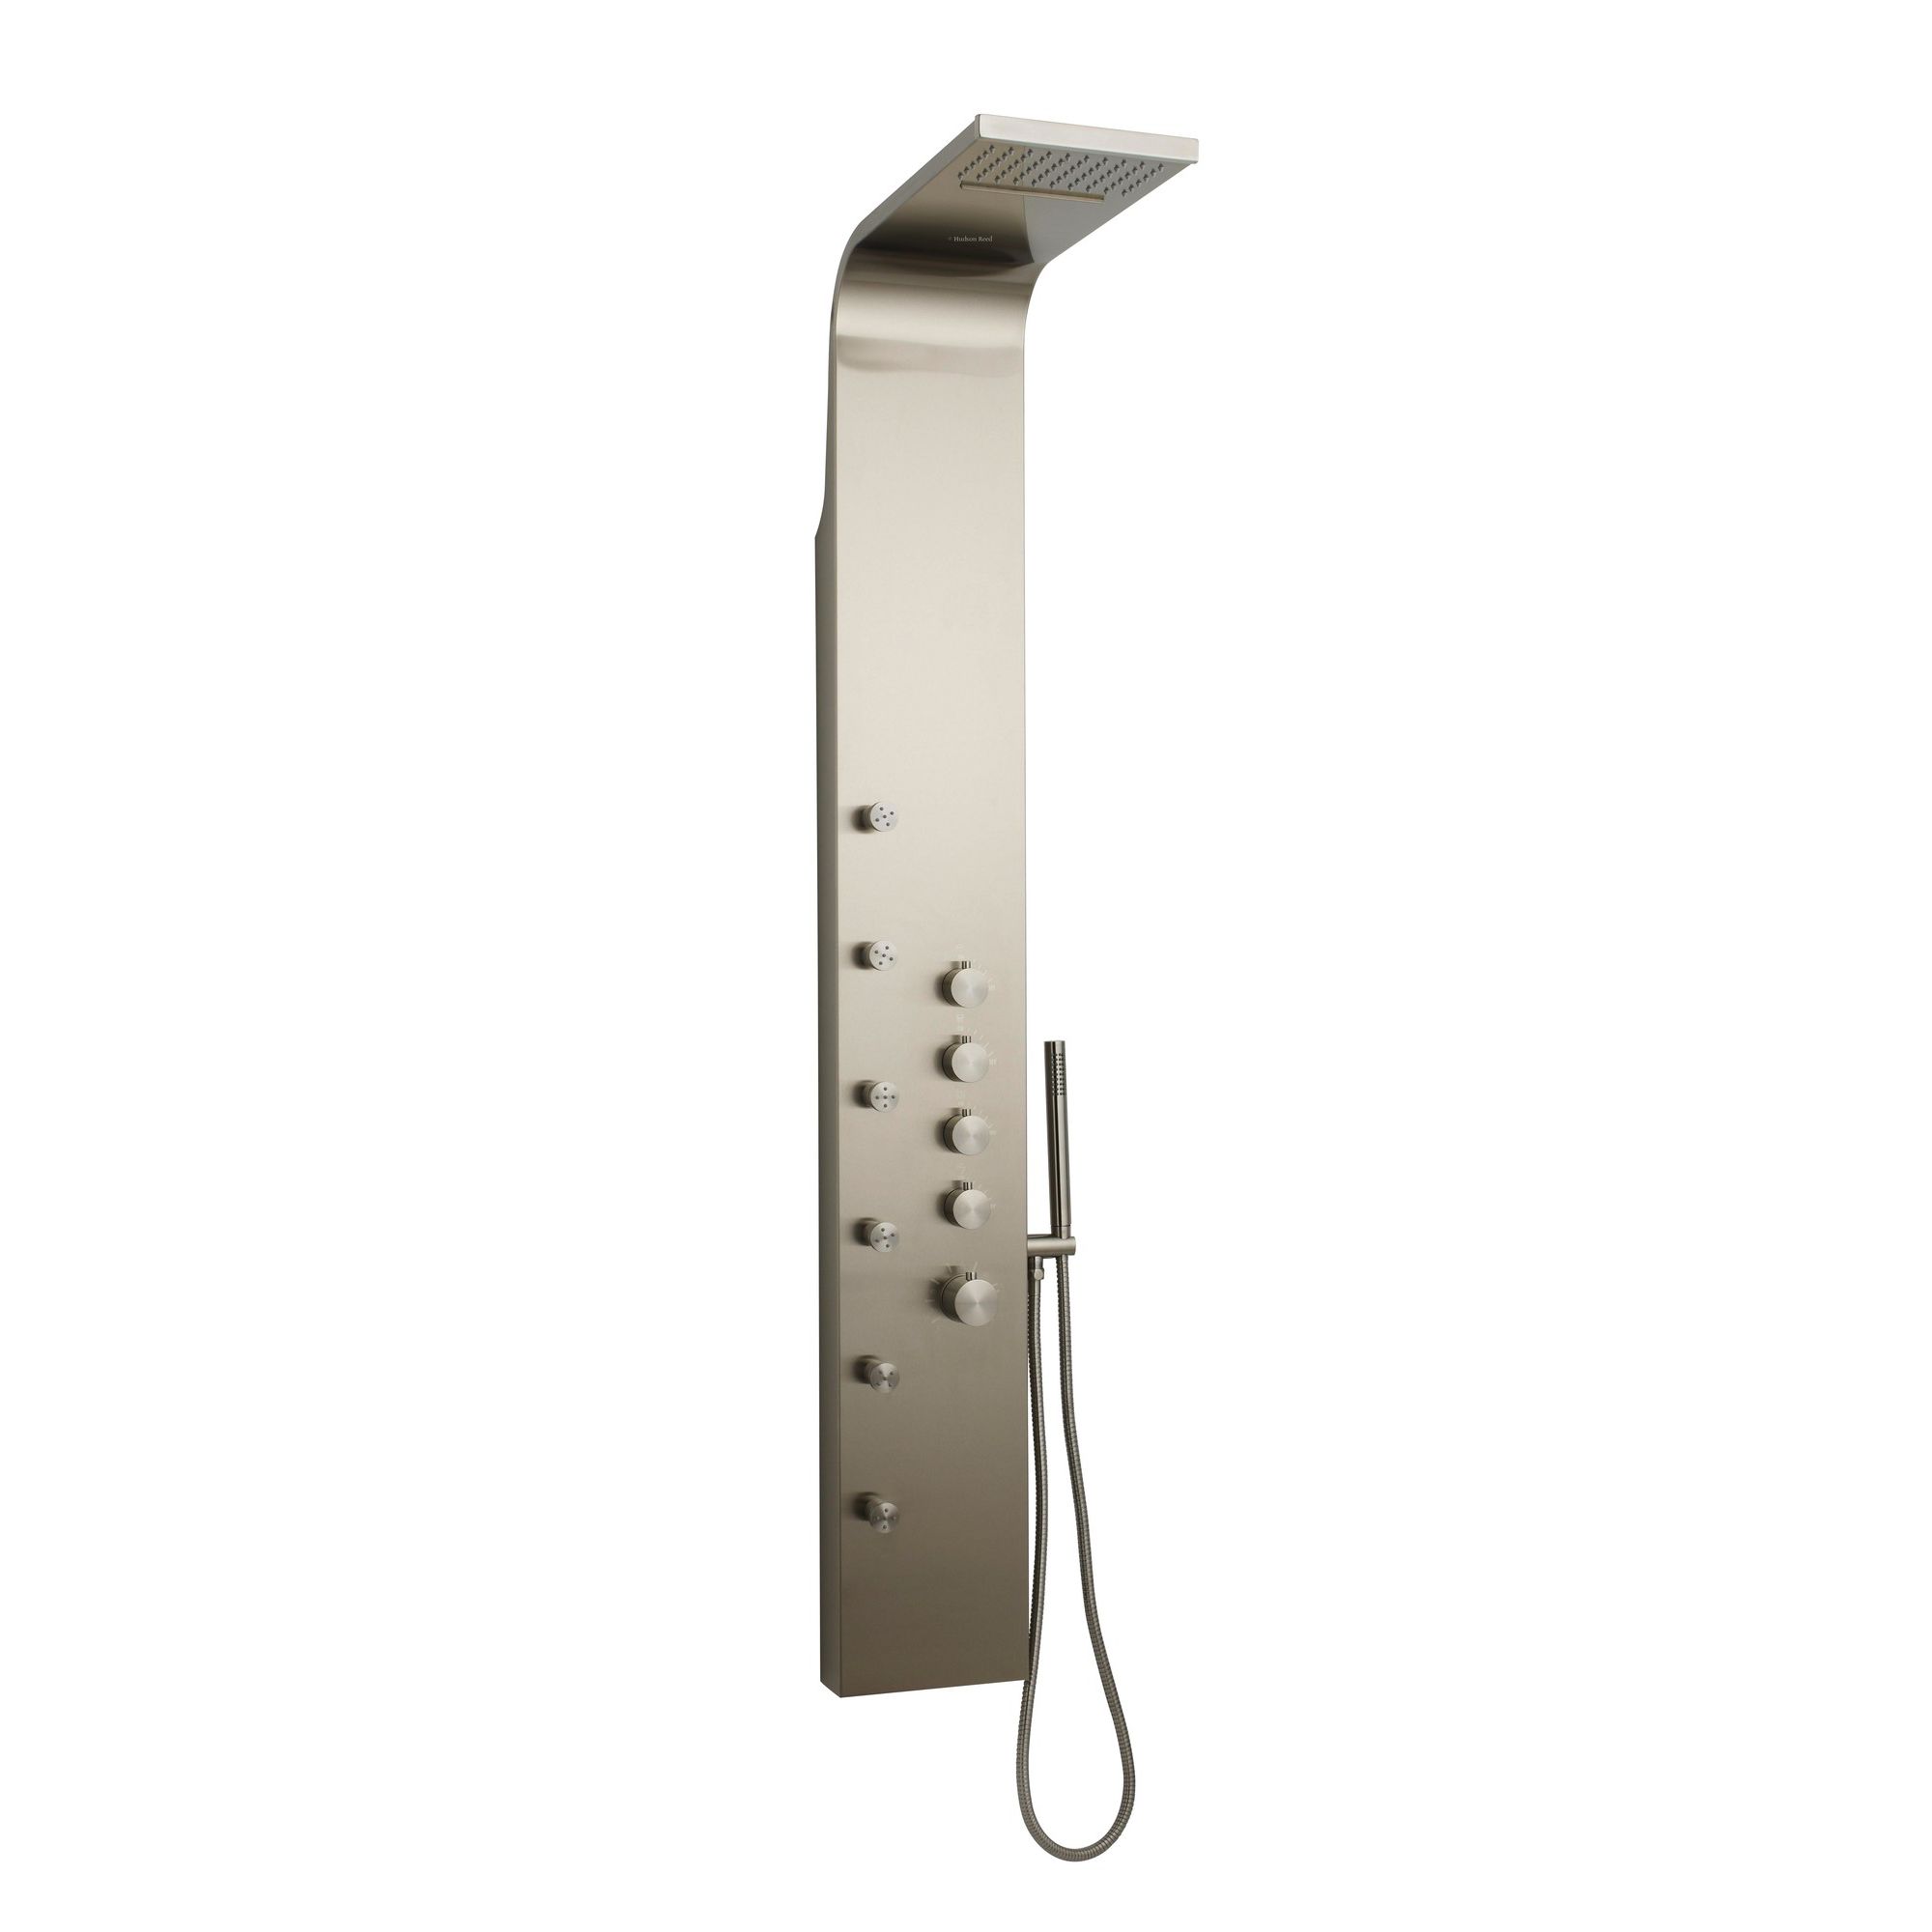 Hudson Reed Cosmos Thermostatic Shower Panel at Tesco Direct